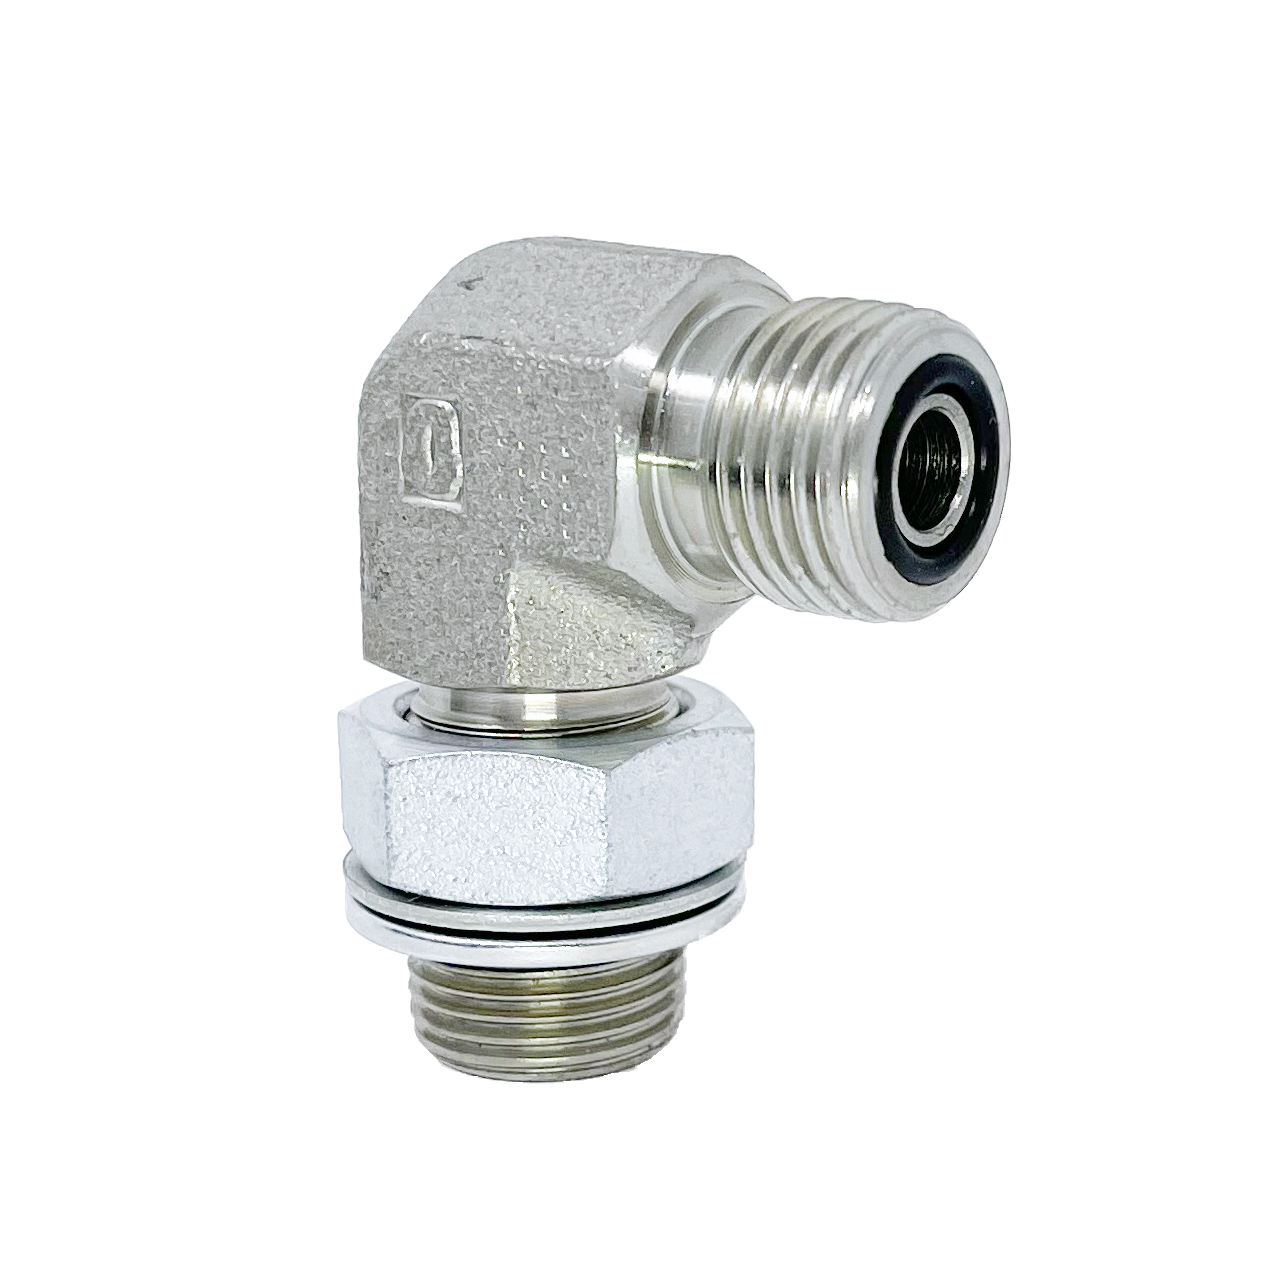 6059-24-24 : Adaptall 90-Degree  Adapter, Male 1.5 (1-1/2") ORFS x Male 1.5 (1-1/2") BSPP, Carbon Steel